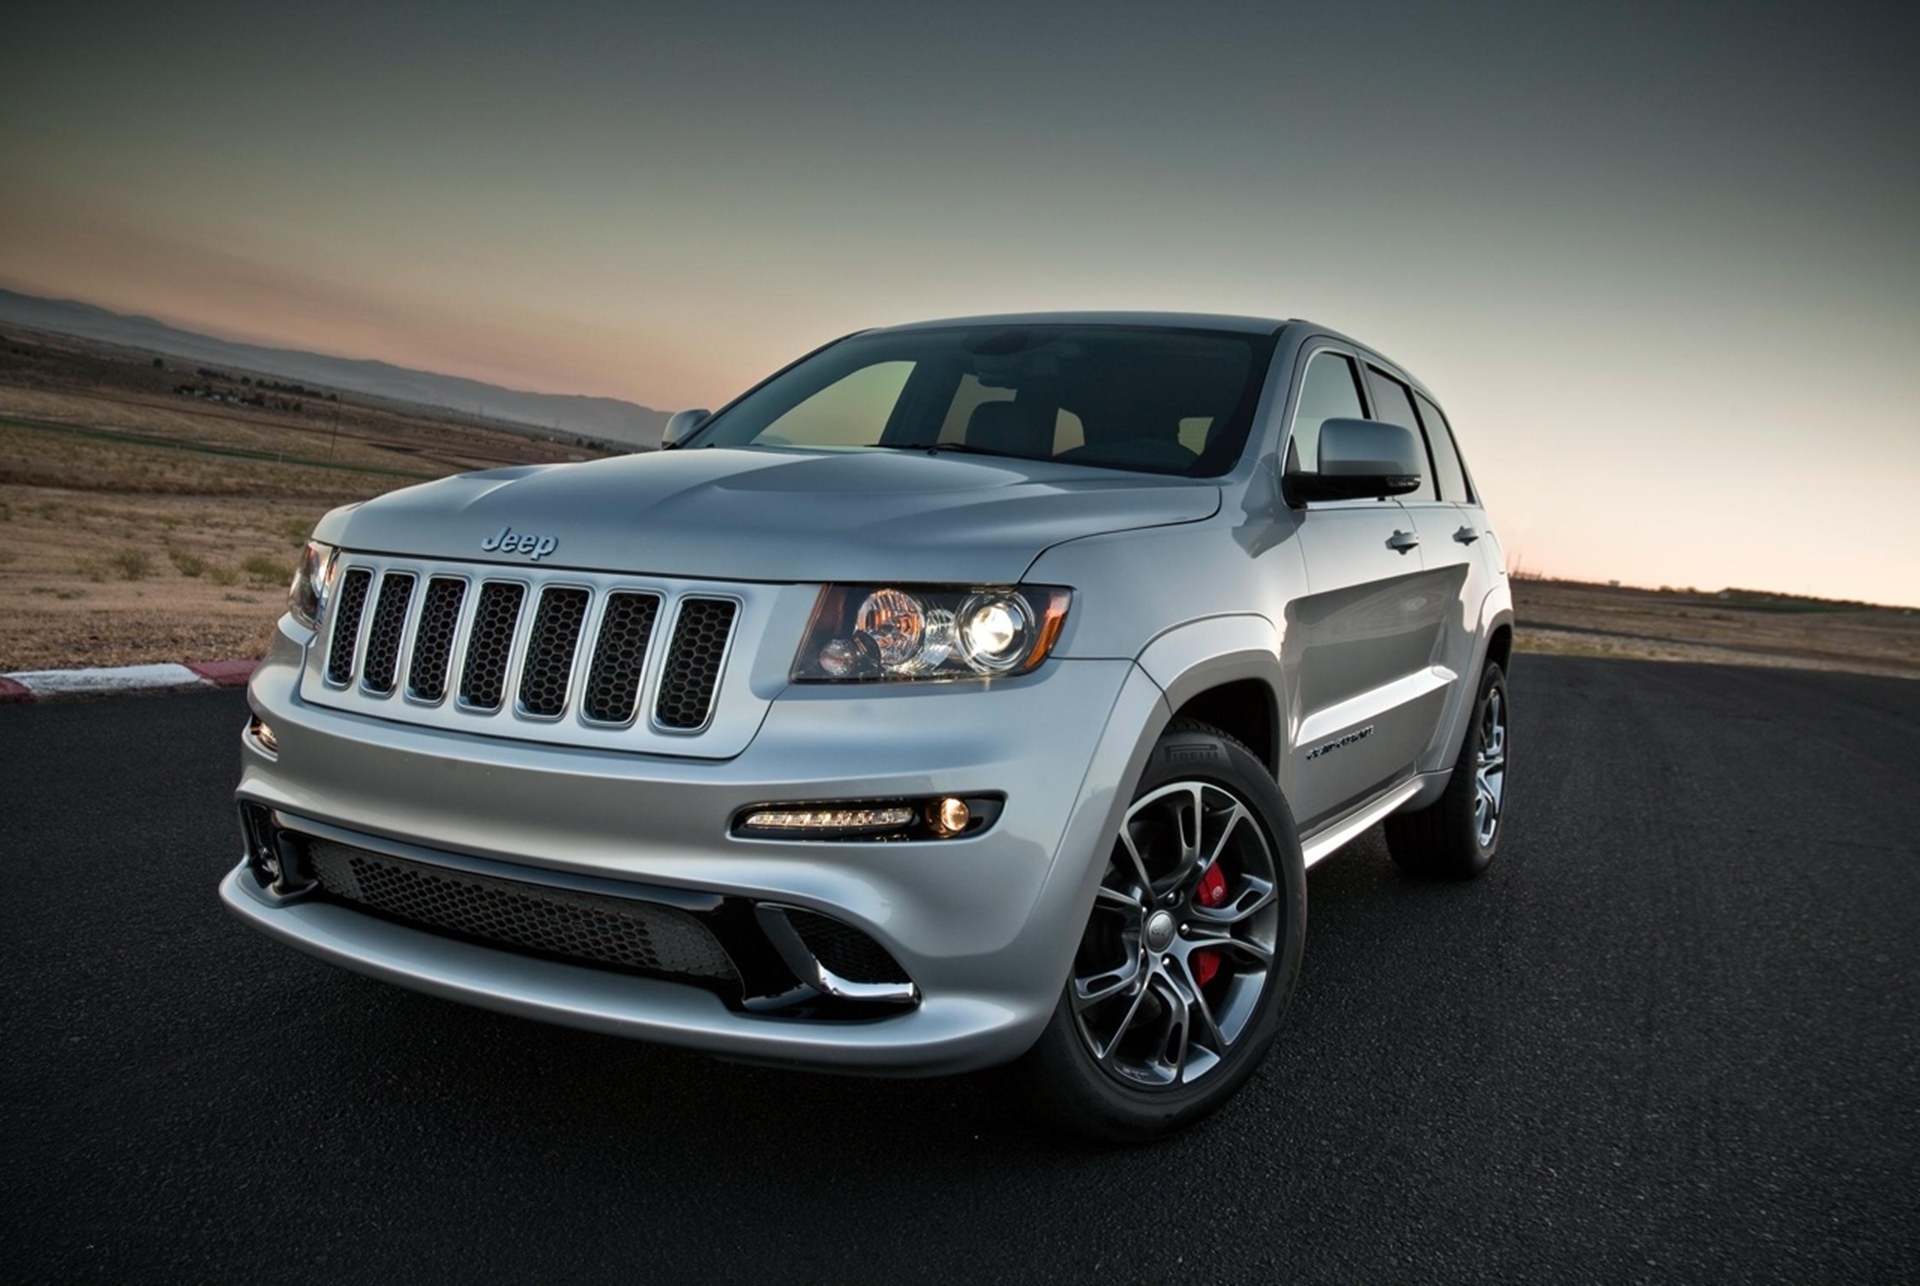 JEEP GRAND CHEROKEE SRT – THE MOST POWERFUL AND FASTEST JEEP EVER